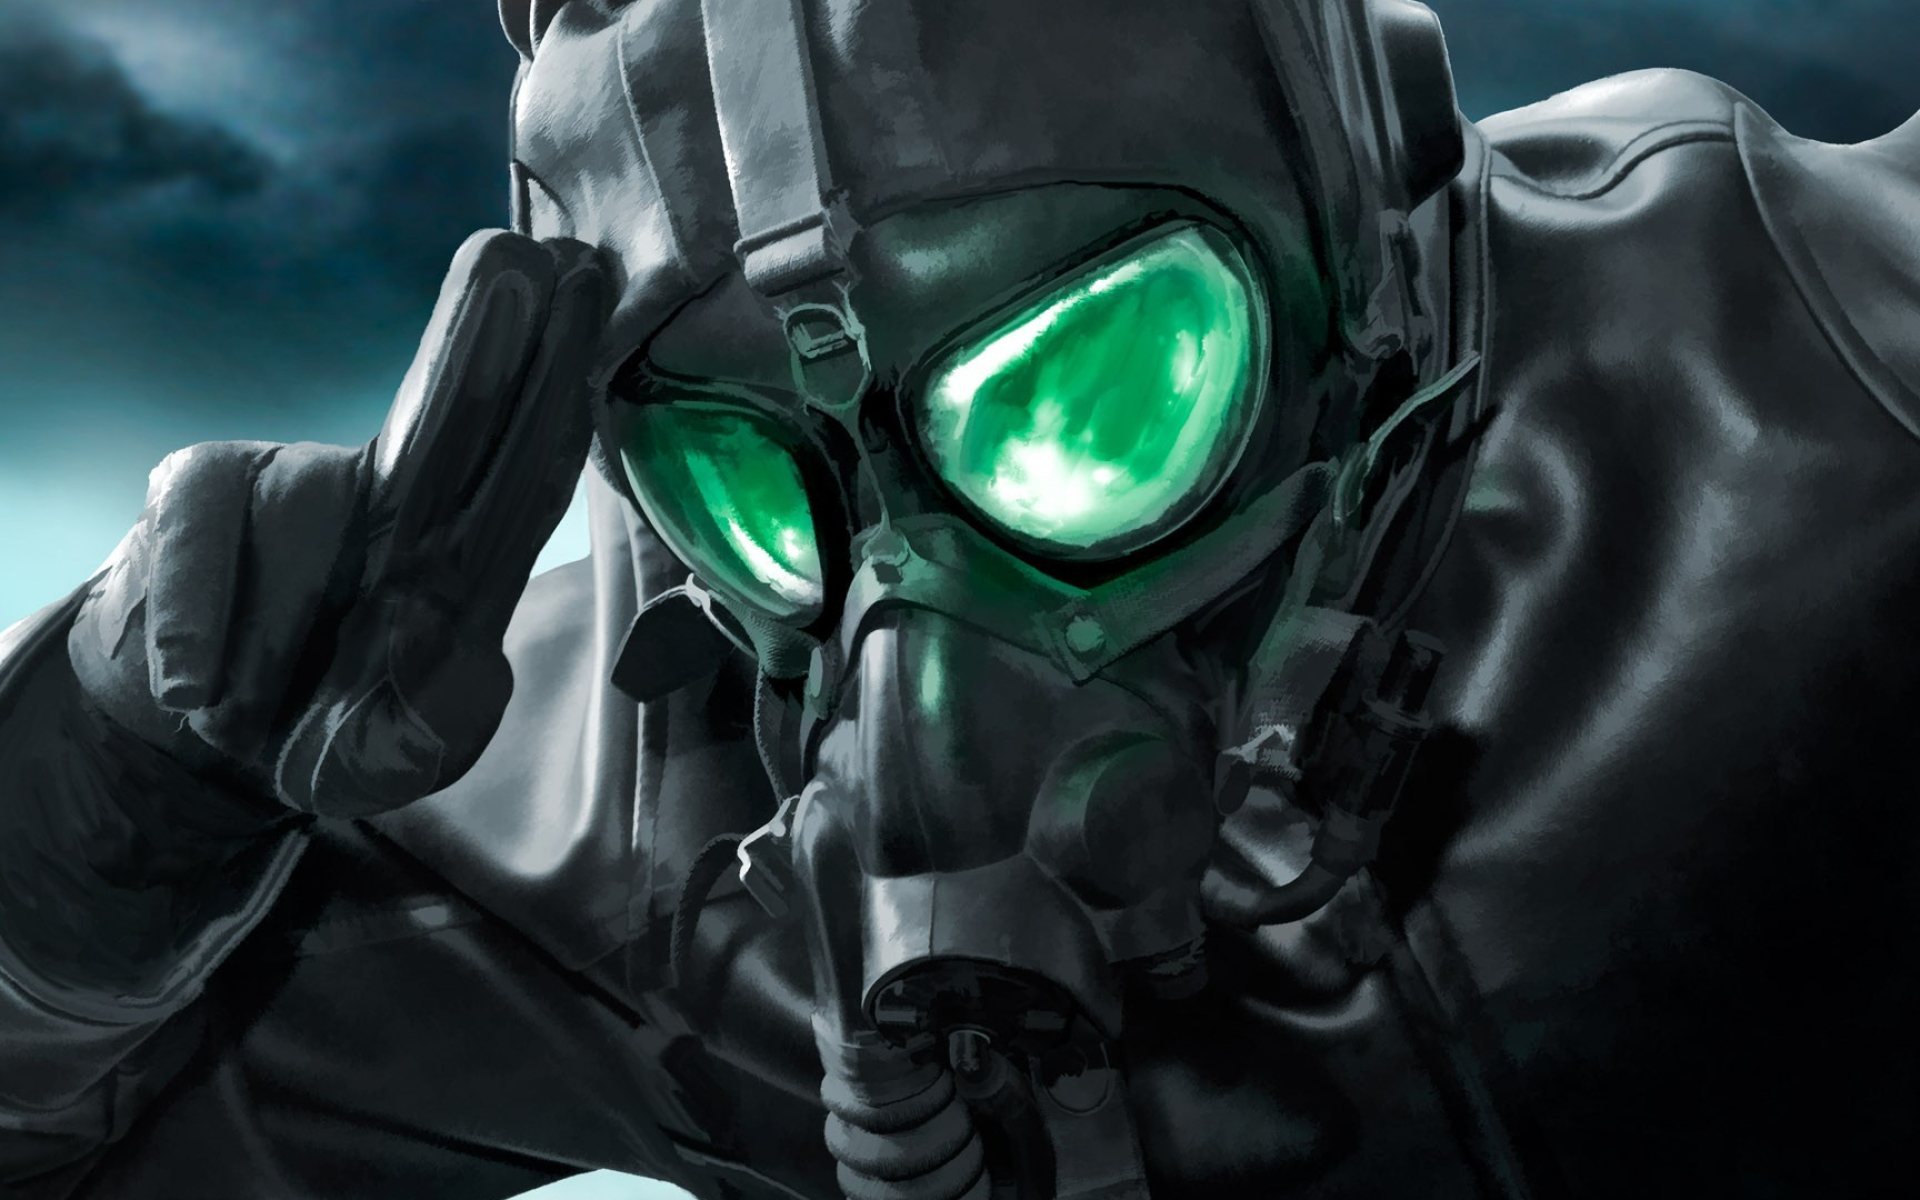 1920x1200 Wallpaper : gas masks, apocalyptic, Romantically Apocalyptic, Vitaly S Alexius, salute, darkness, screenshot, px, computer wallpaper goodfon 545173 HD Wallpapers